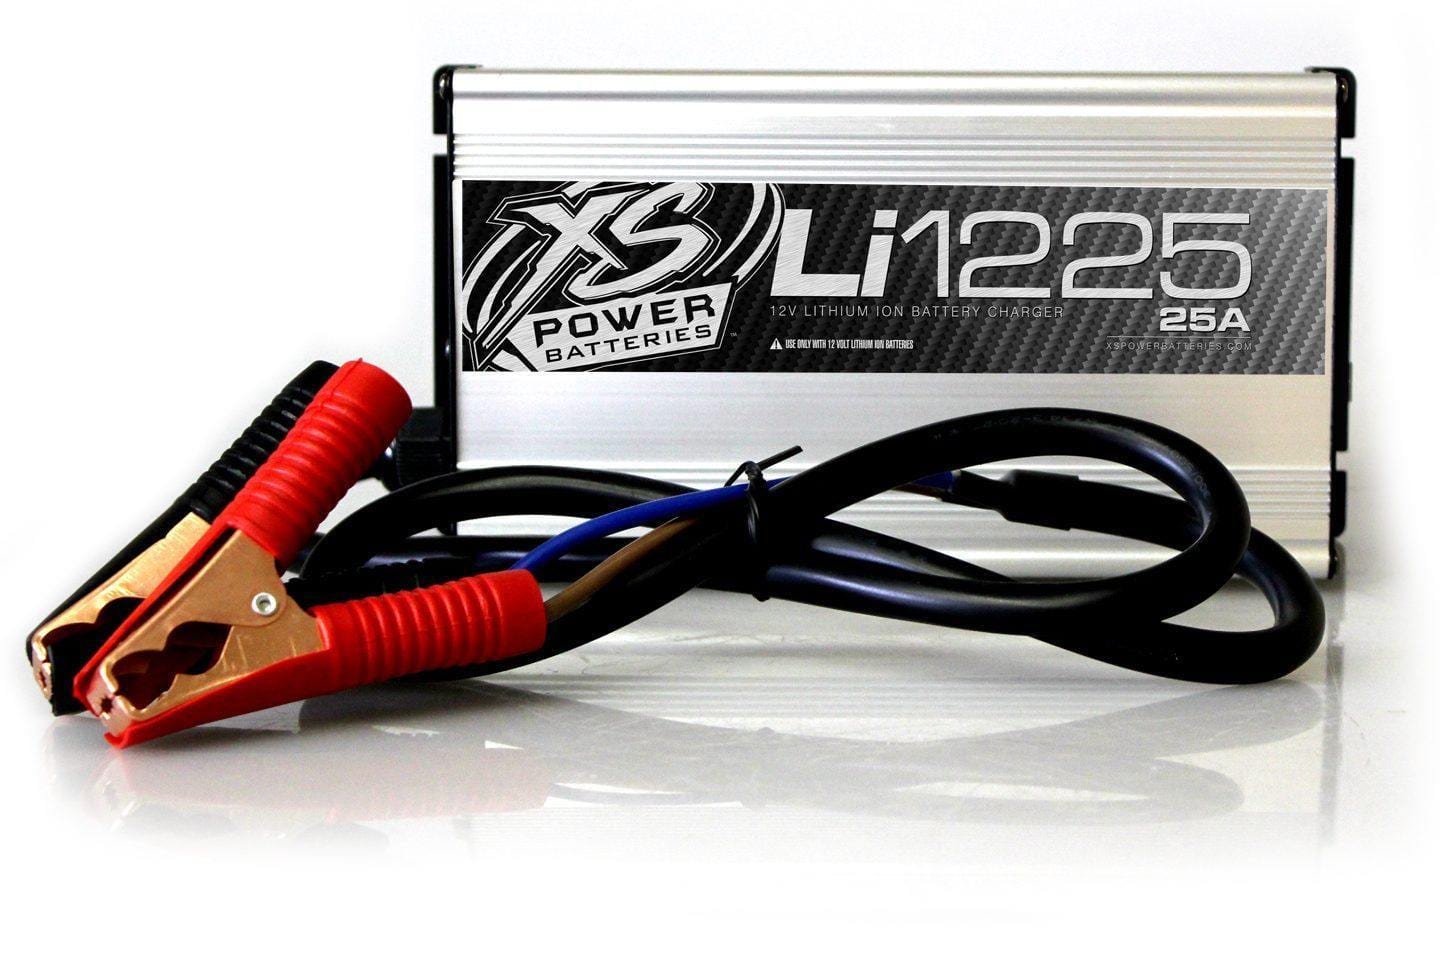 XS Power Battery 12v 25 Amp Lithium Charger $379.99 XS Power  Lithium Battery Chargers